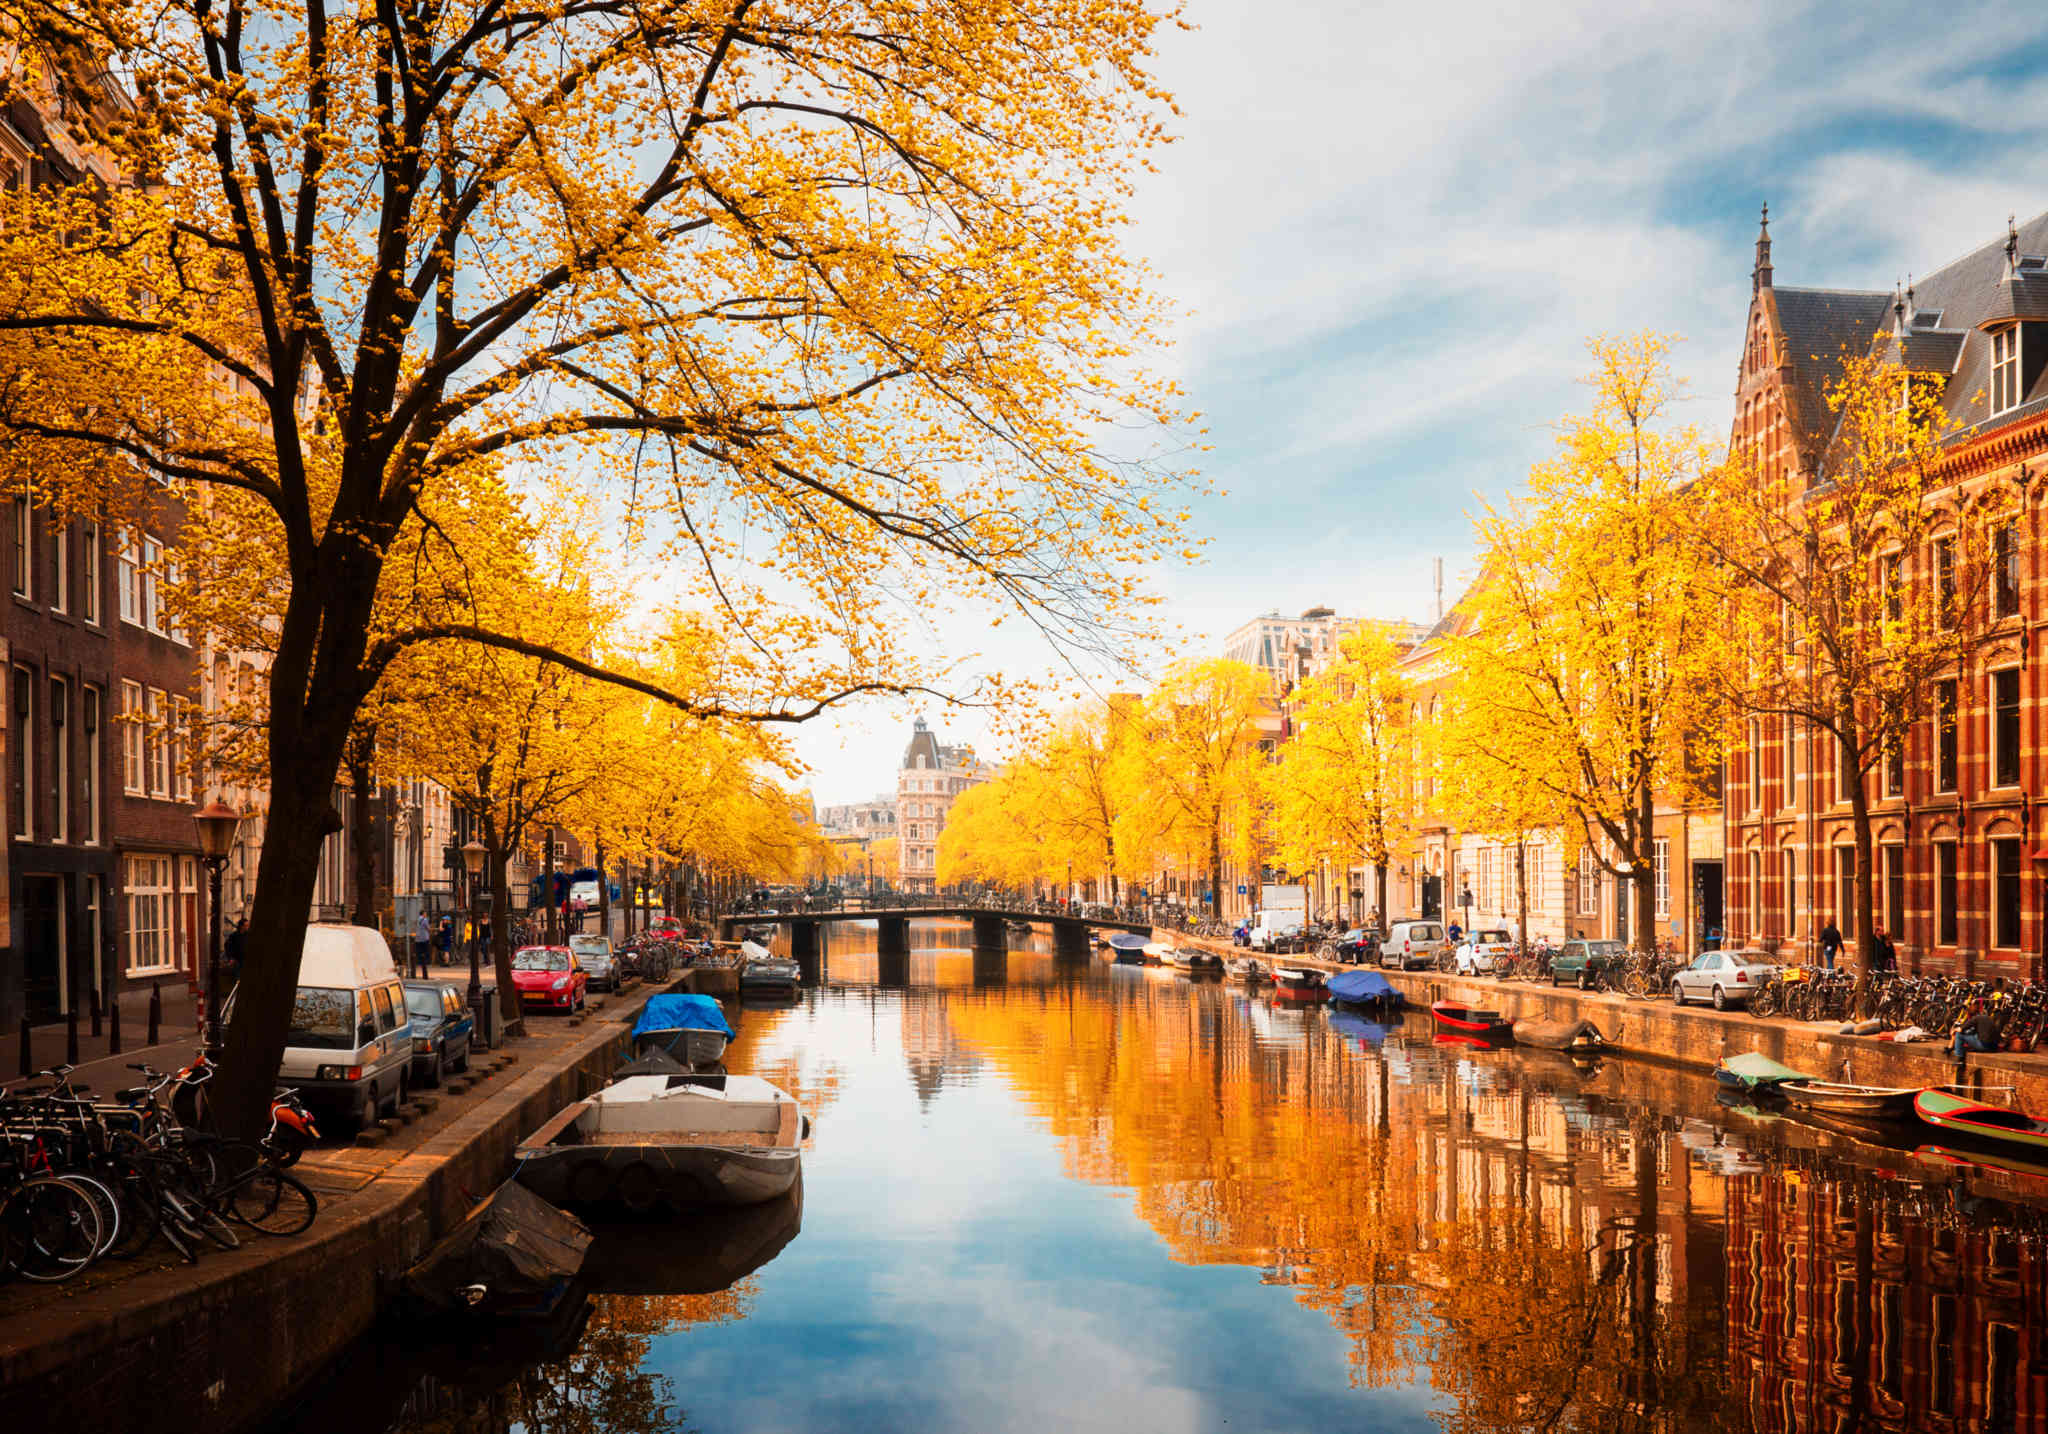 The Most Beautiful European Cities To Visit In Autumn